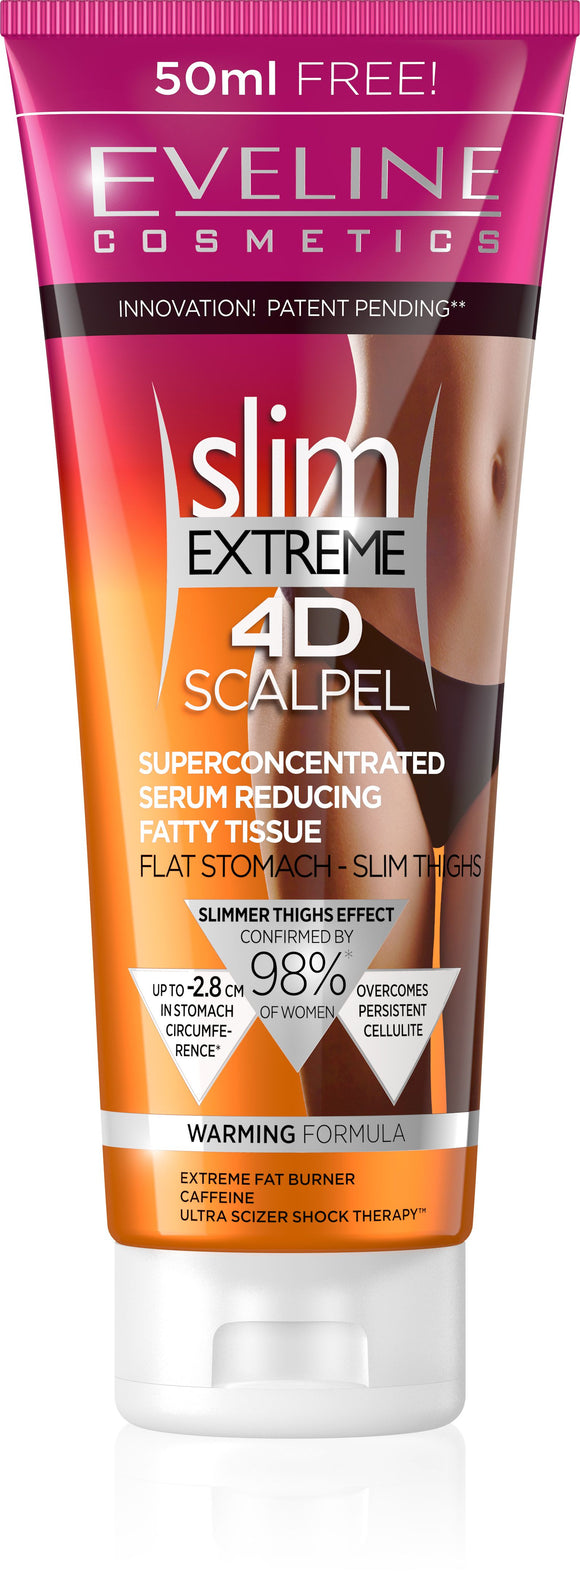 Eveline Slim EXTREME 4D Scalpel Super Concentrated Fat Reducing Serum 250 ml - mydrxm.com